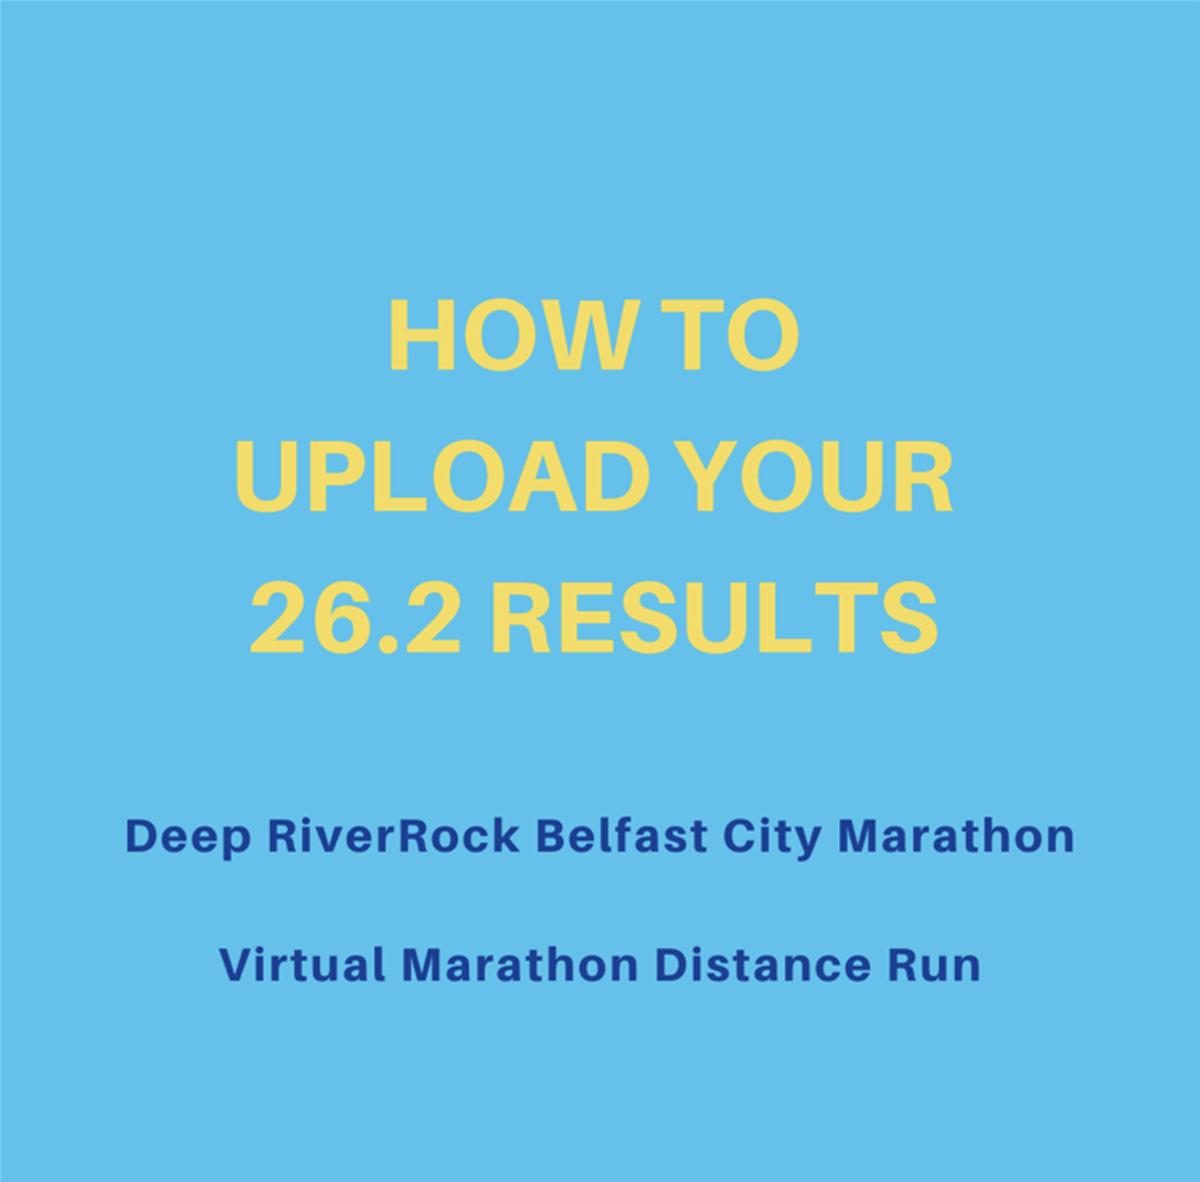 Reminder to upload virtual distance results